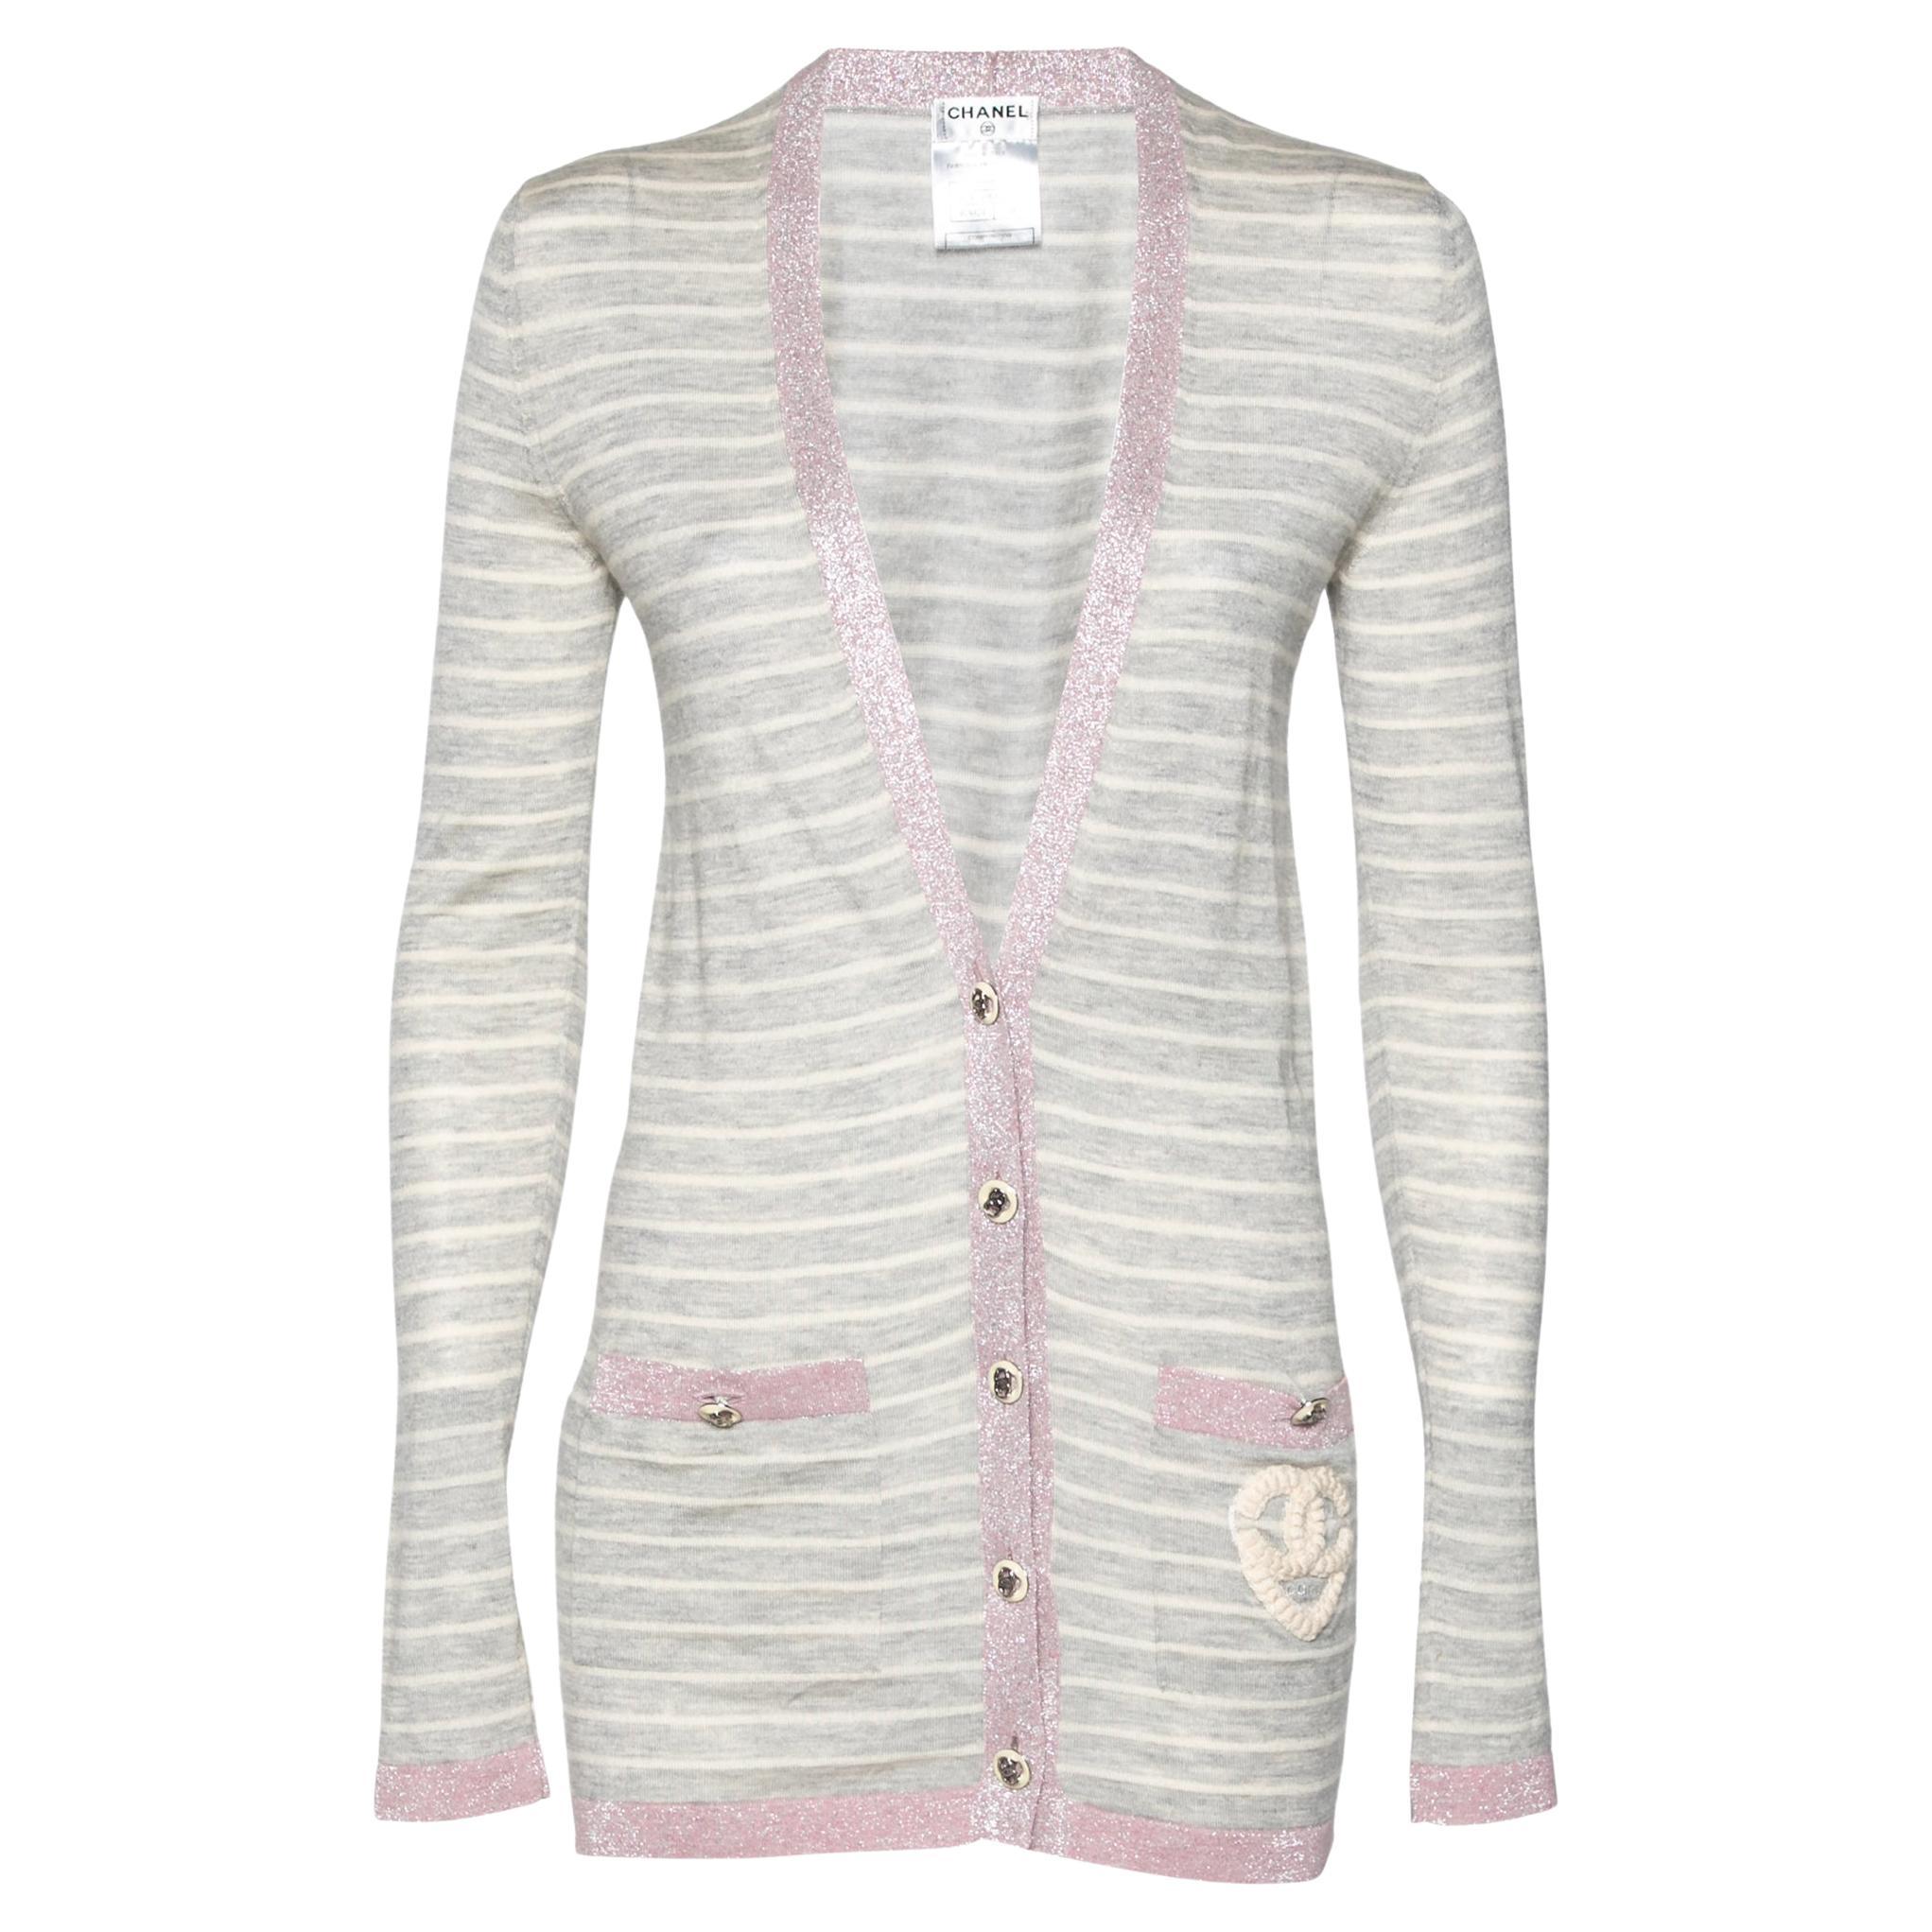 CHANEL, Sweaters, Chanel Classic Authentic Stripe Runway Pink Gray